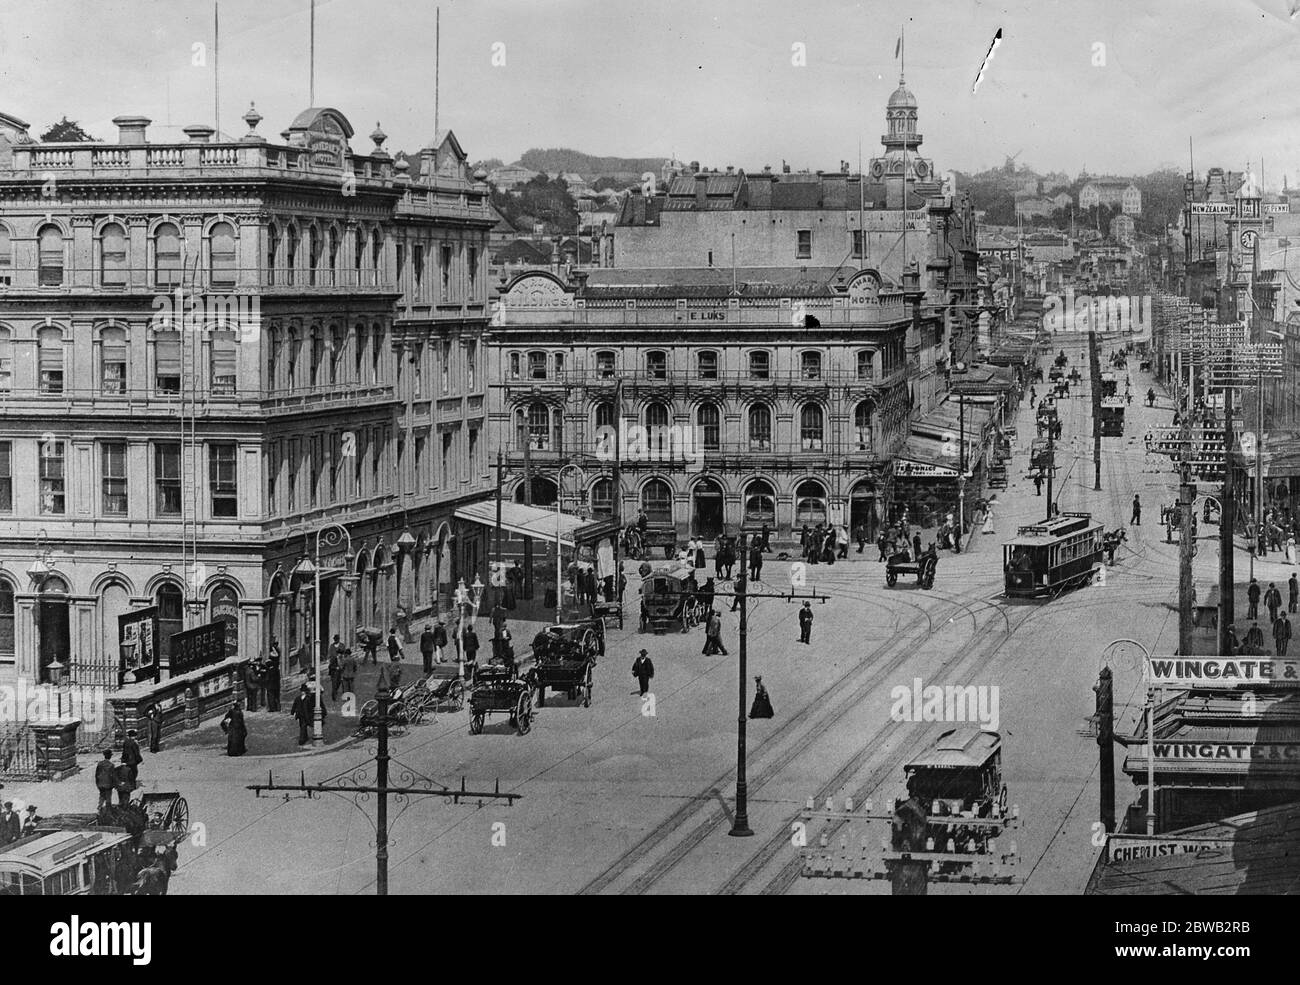 Historic auckland Black and White Stock Photos & Images - Alamy